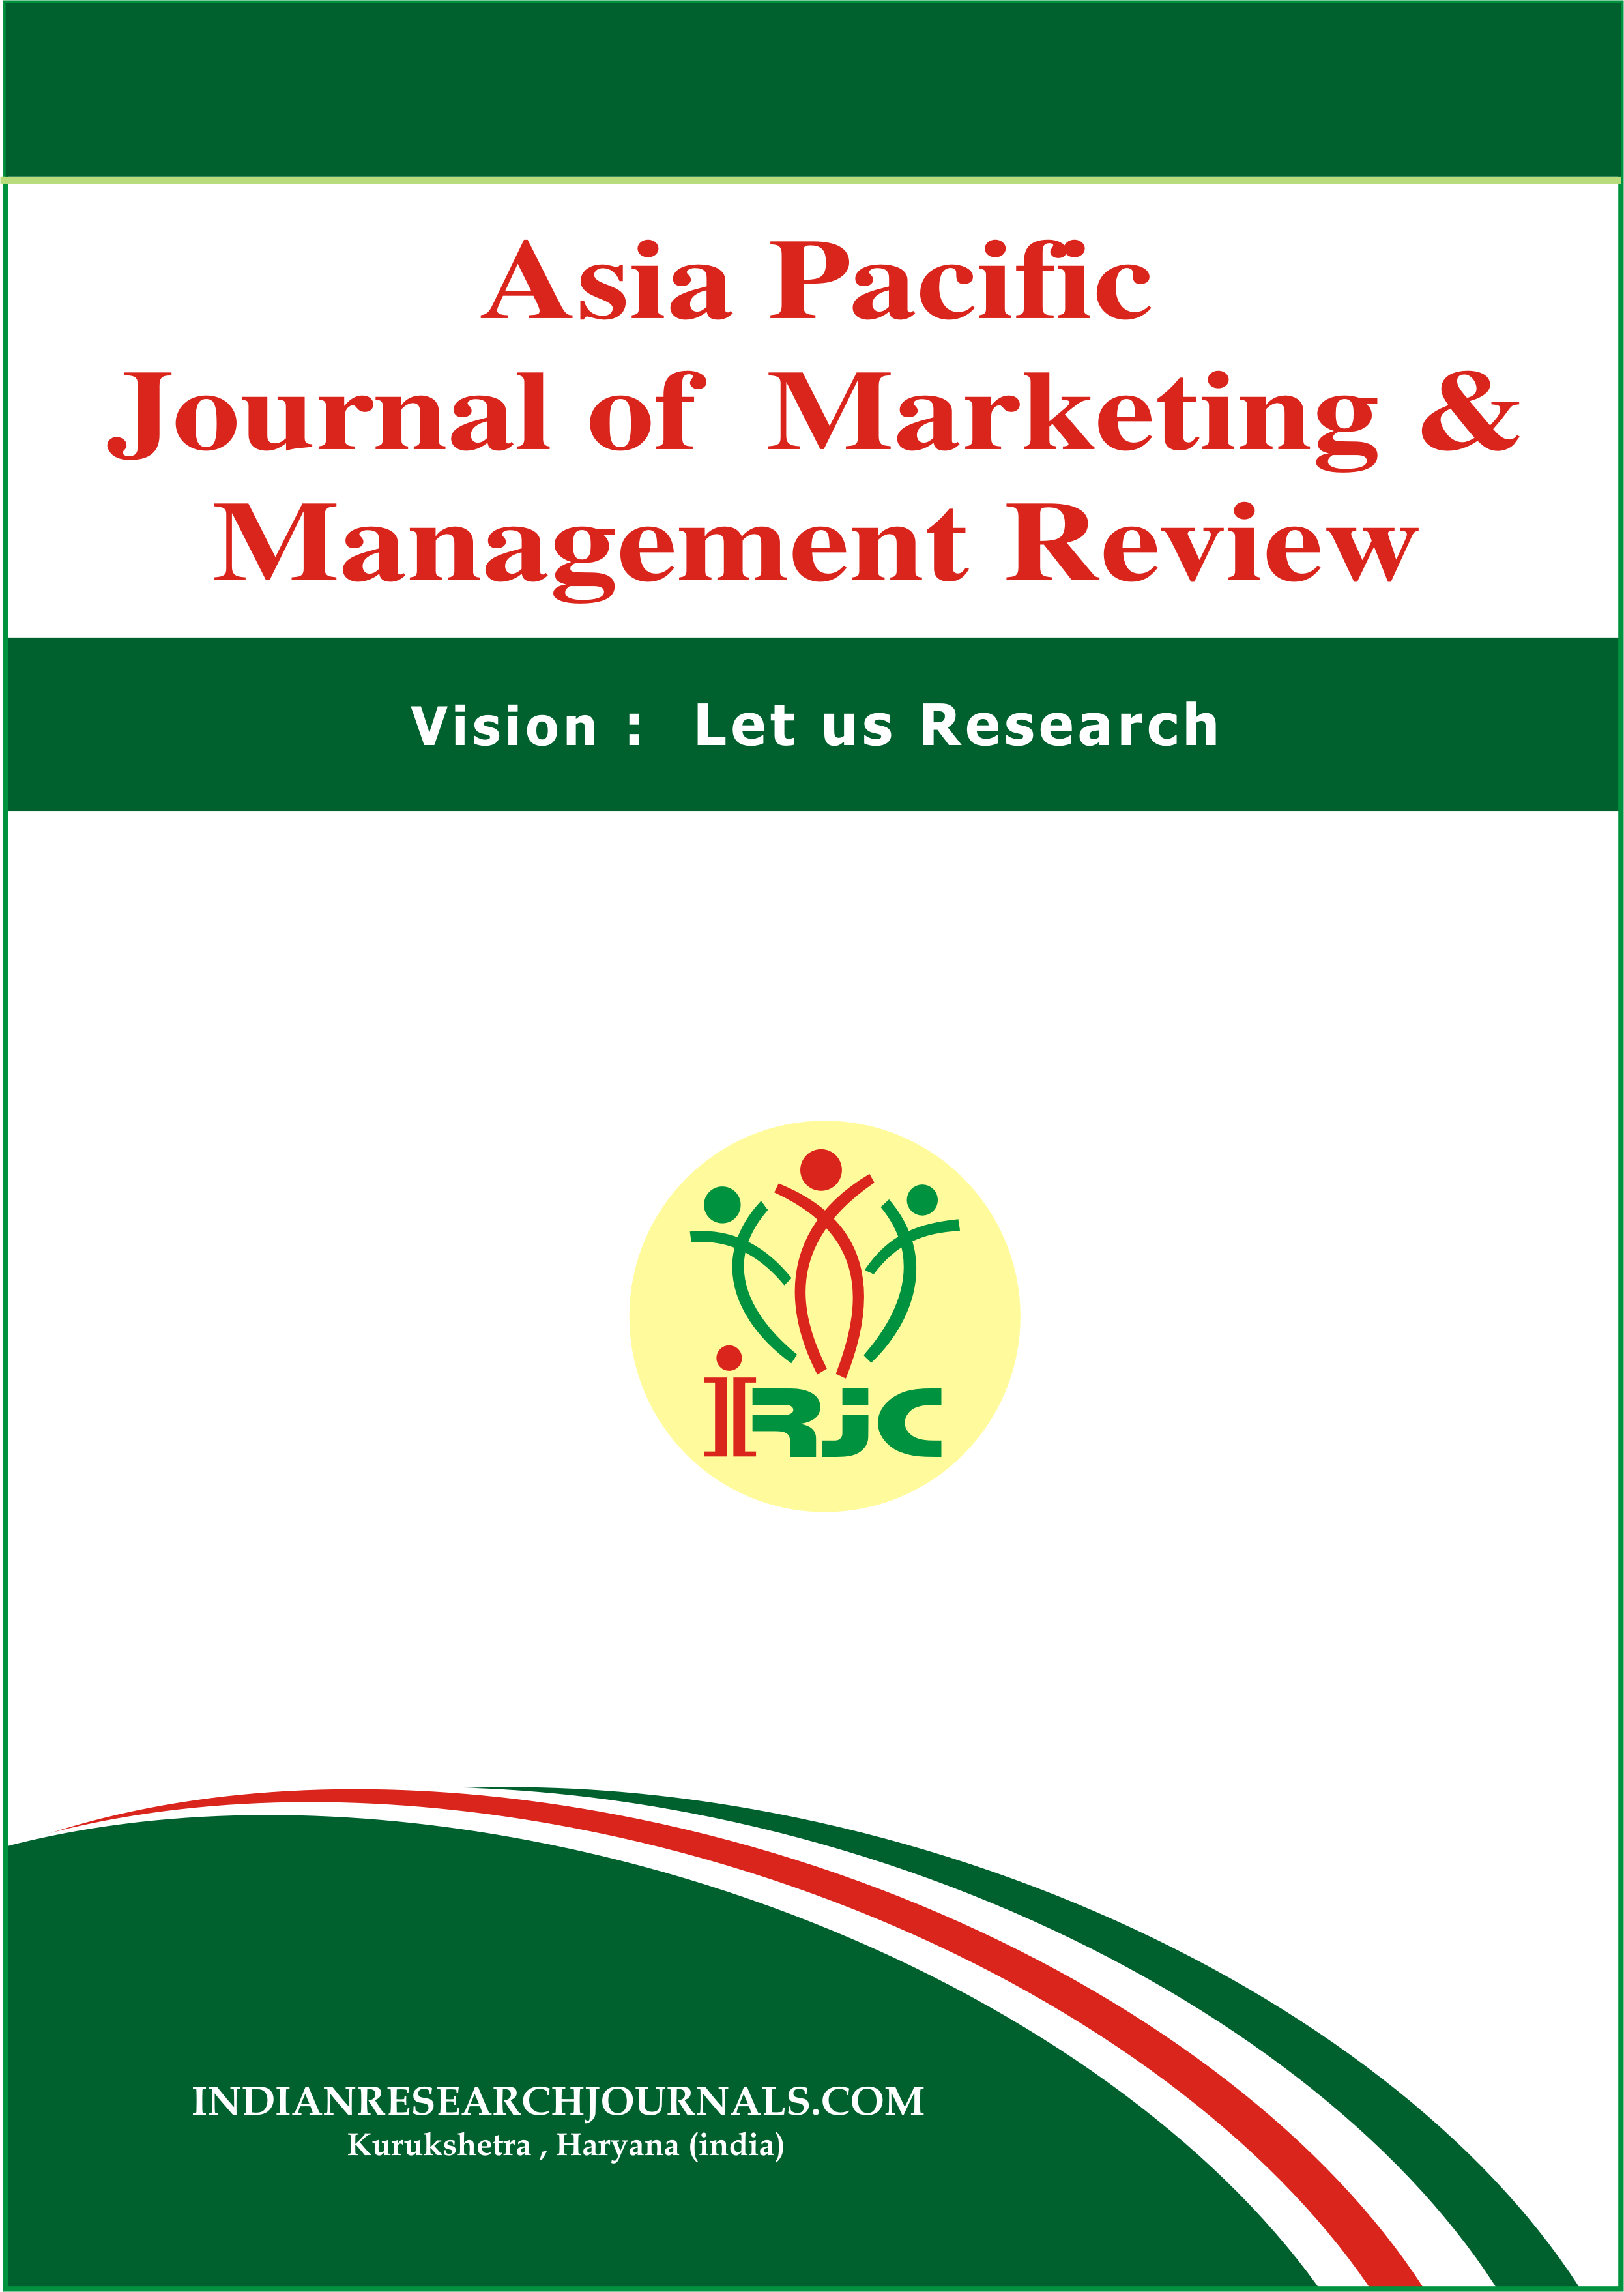 					Visualizza V. 11 N. 10 (2022): ASIA PACIFIC JOURNAL OF MARKETING & MANAGEMENT REVIEW
				